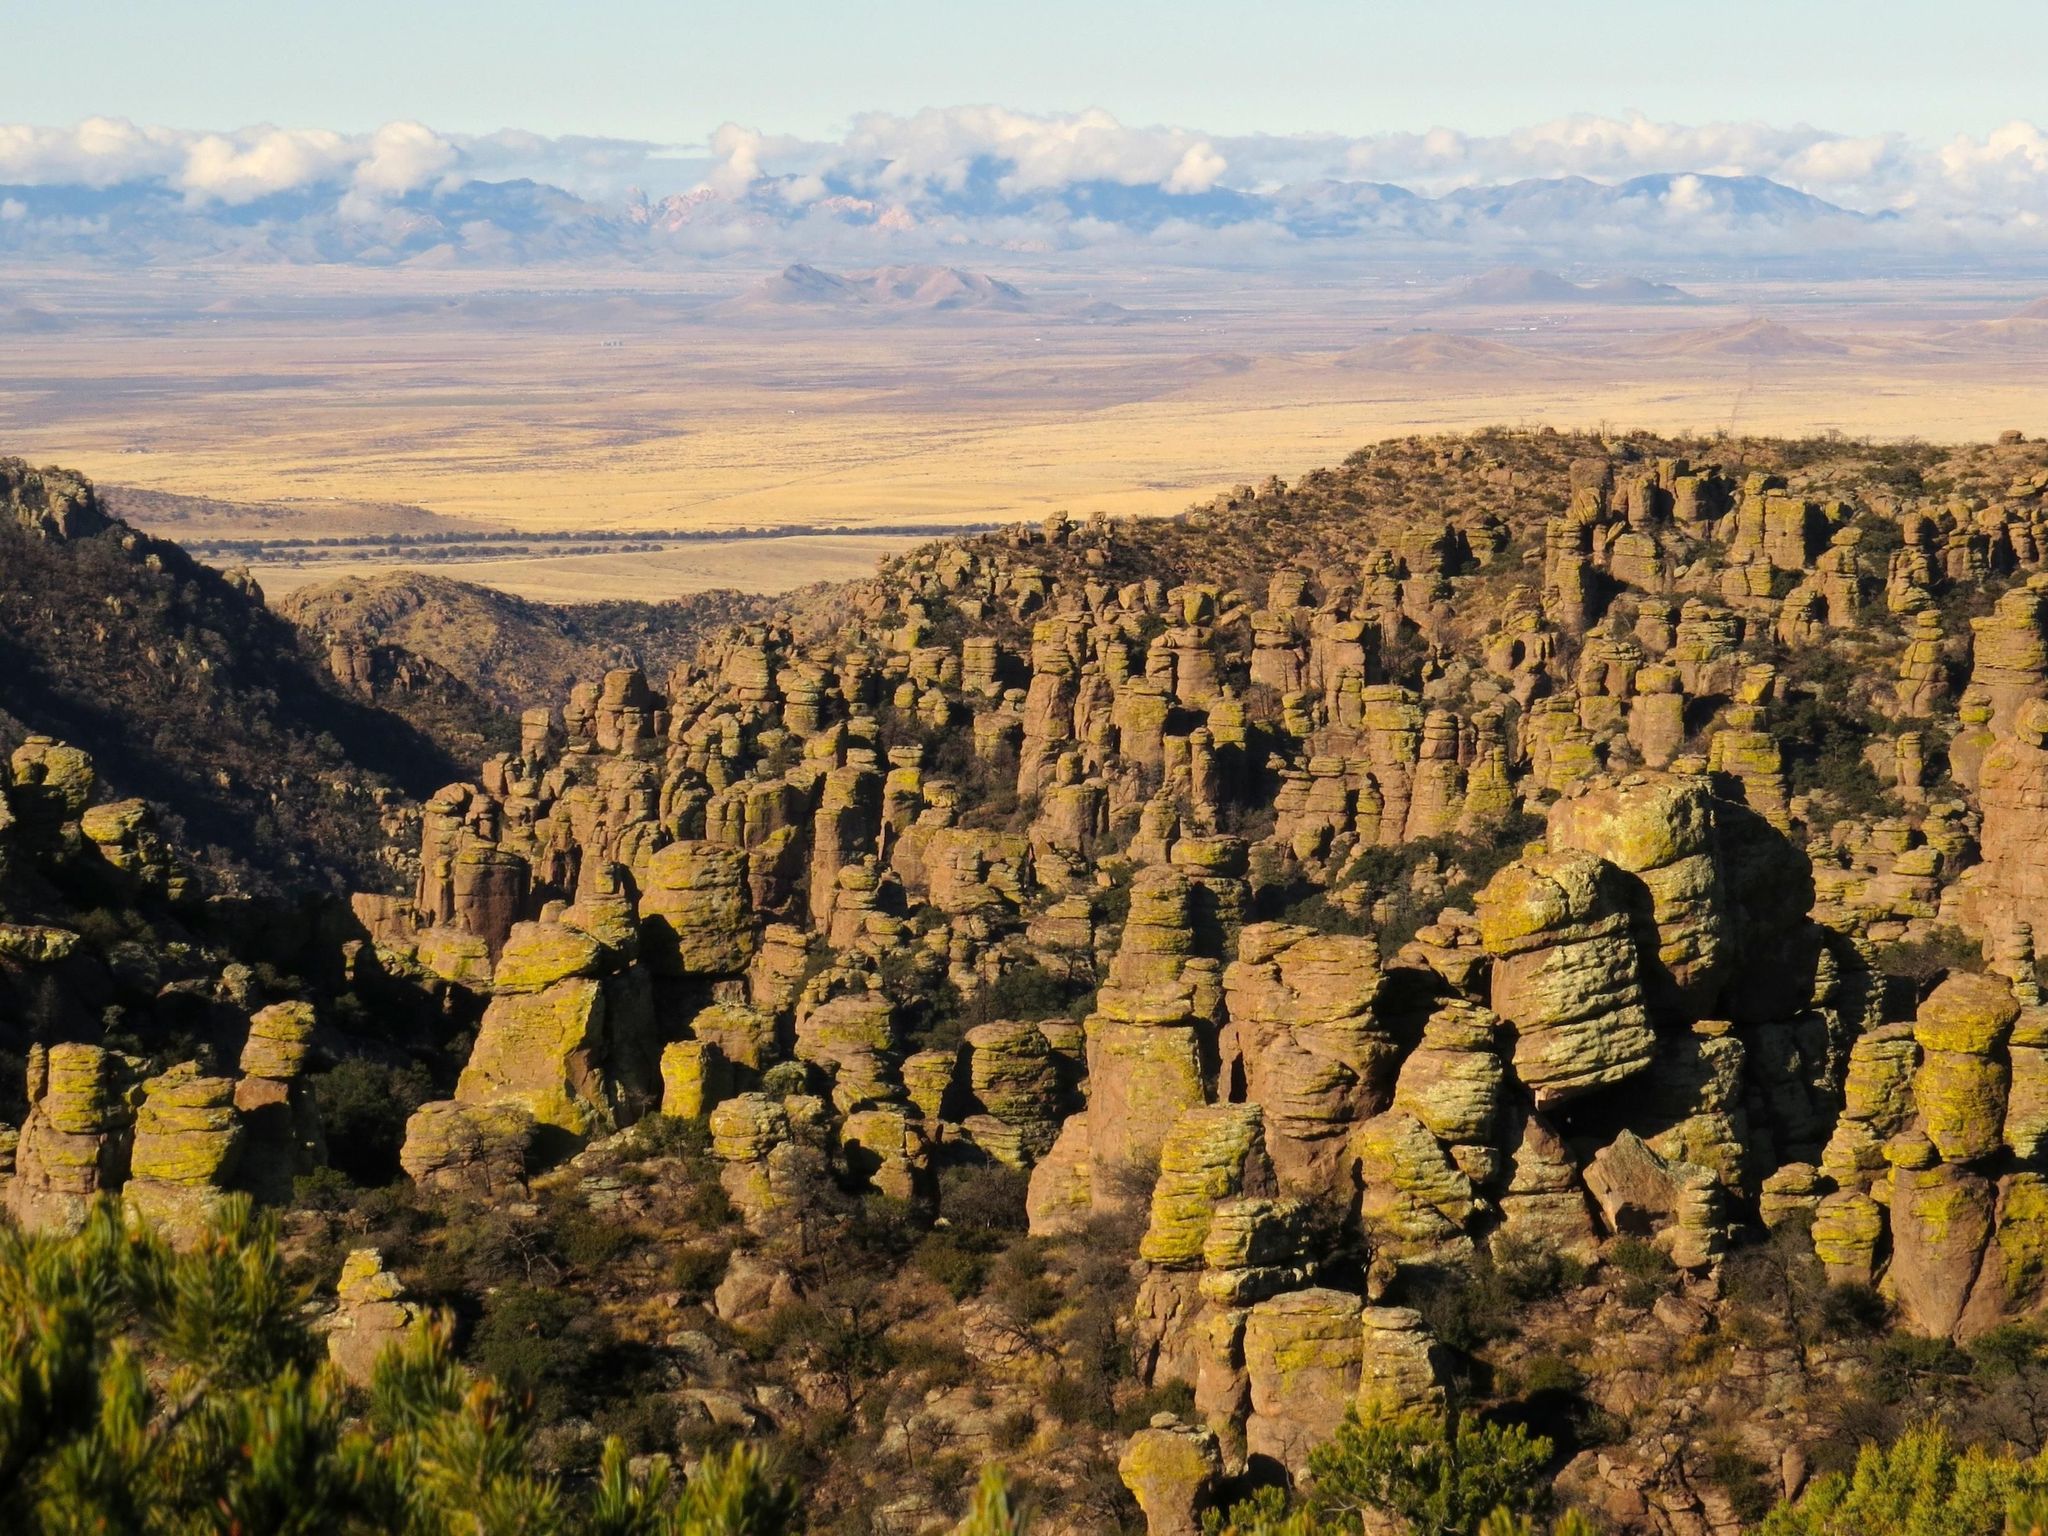 Massai Point offers excellent views of the standing rocks at Chiricahua